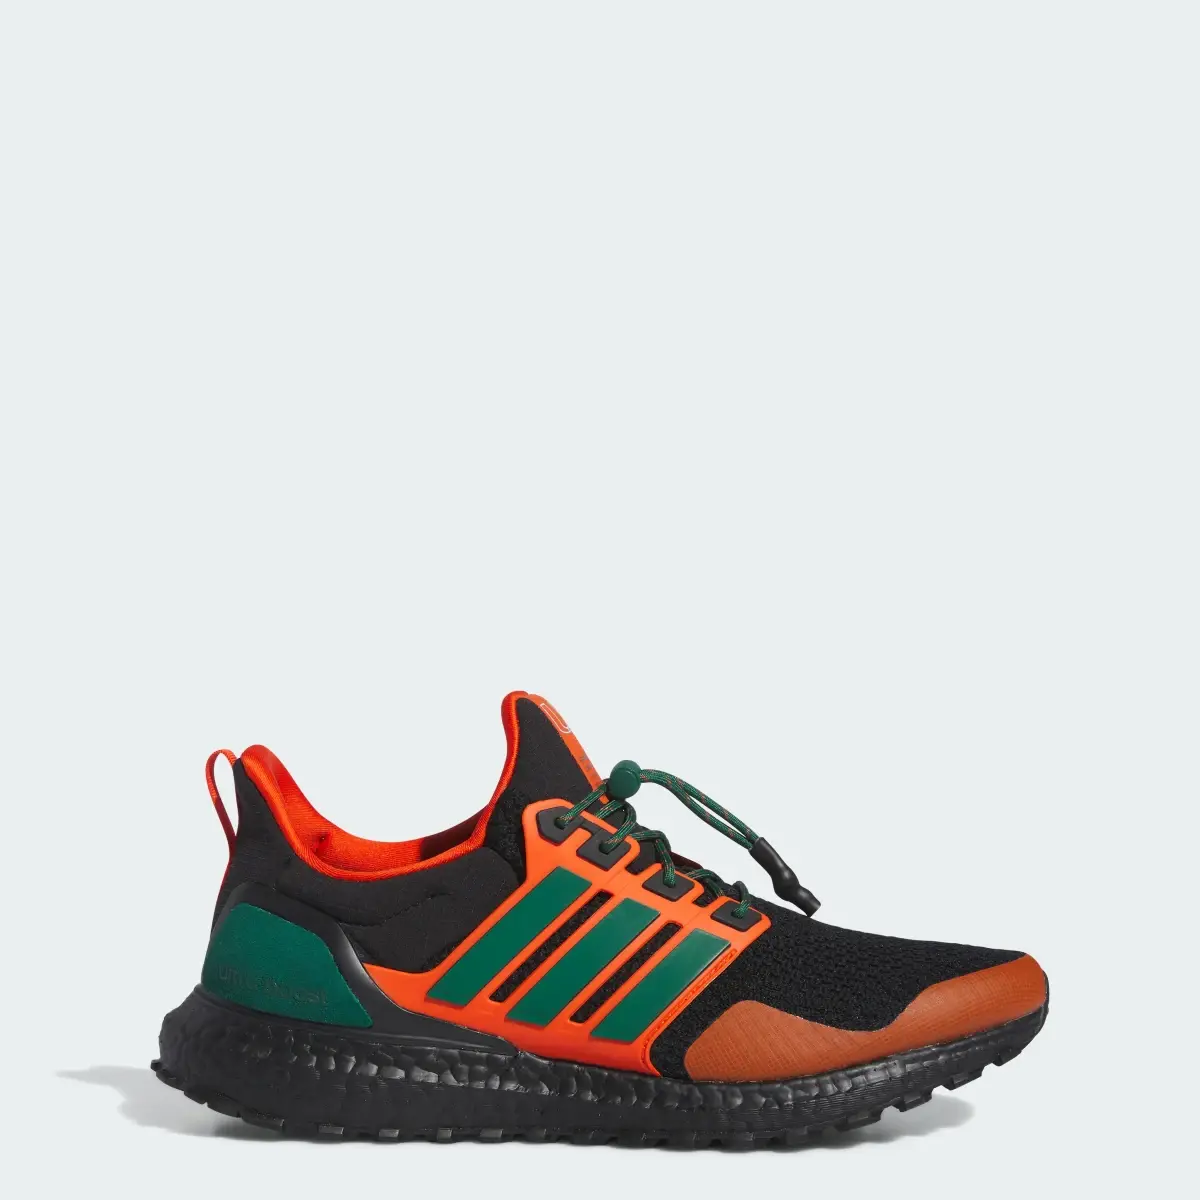 Adidas Miami Ultraboost 1.0 Shoes. 1